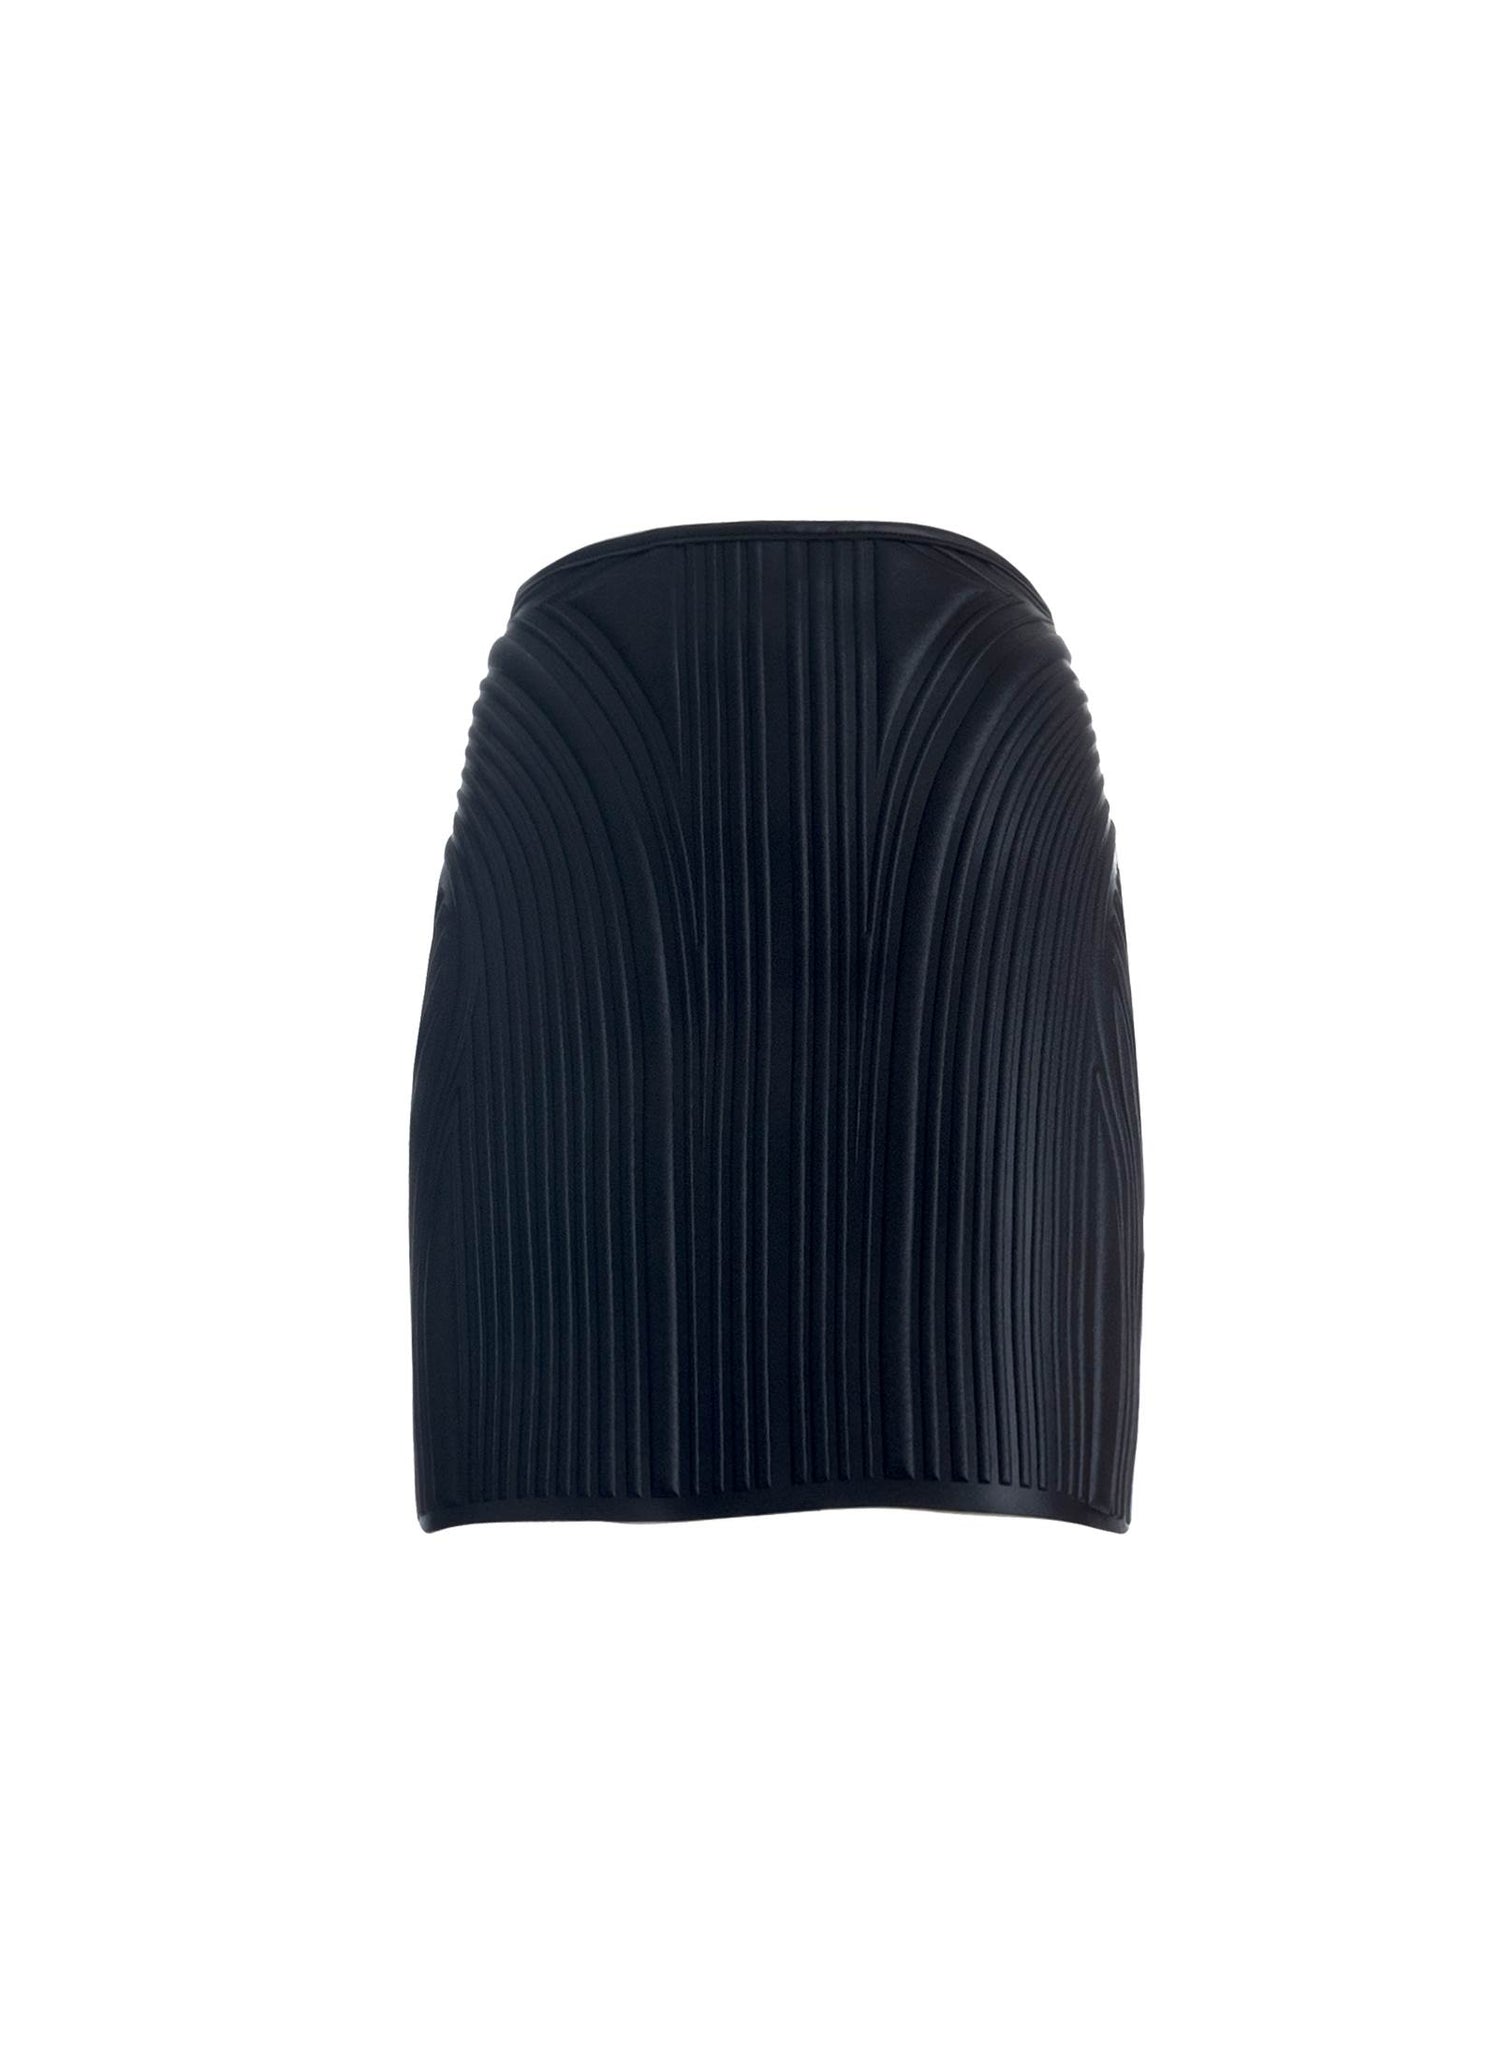 Thermo Impressed Skirt